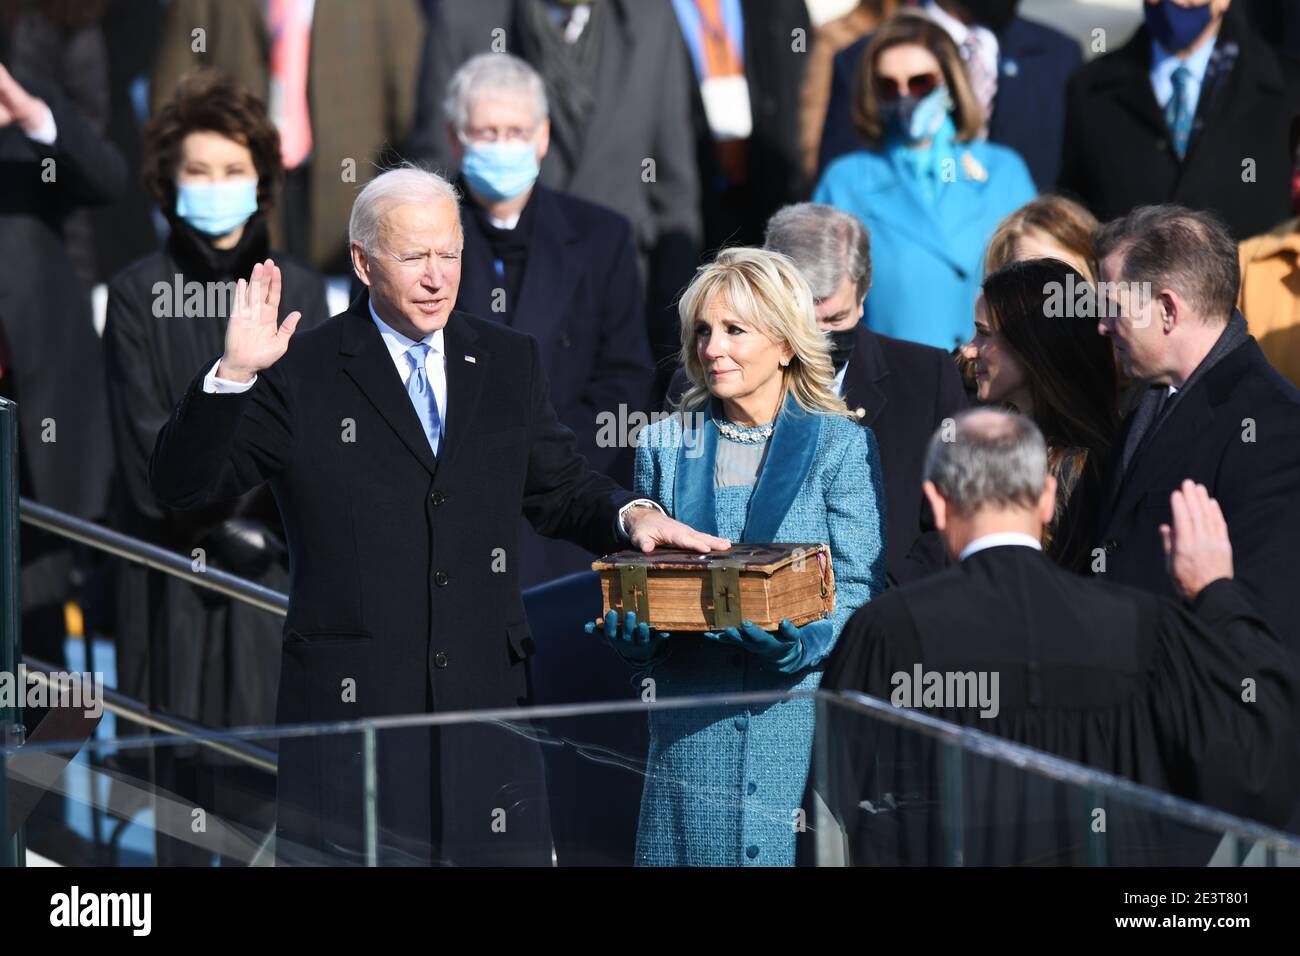 Washington, USA. 20th Jan, 2021. U.S. President-elect Joe Biden (L, Front) is sworn in as the 46th President of the United States in Washington, DC, the United States, on Jan. 20, 2021. At an unusual inauguration closed to public due to the still raging coronavirus pandemic, U.S. President-elect Joe Biden was sworn in as the 46th President of the United States on Wednesday at the West Front of the Capitol, which was breached two weeks ago by violent protesters trying to overturn his election victory. Credit: Liu Jie/Xinhua/Alamy Live News Stock Photo